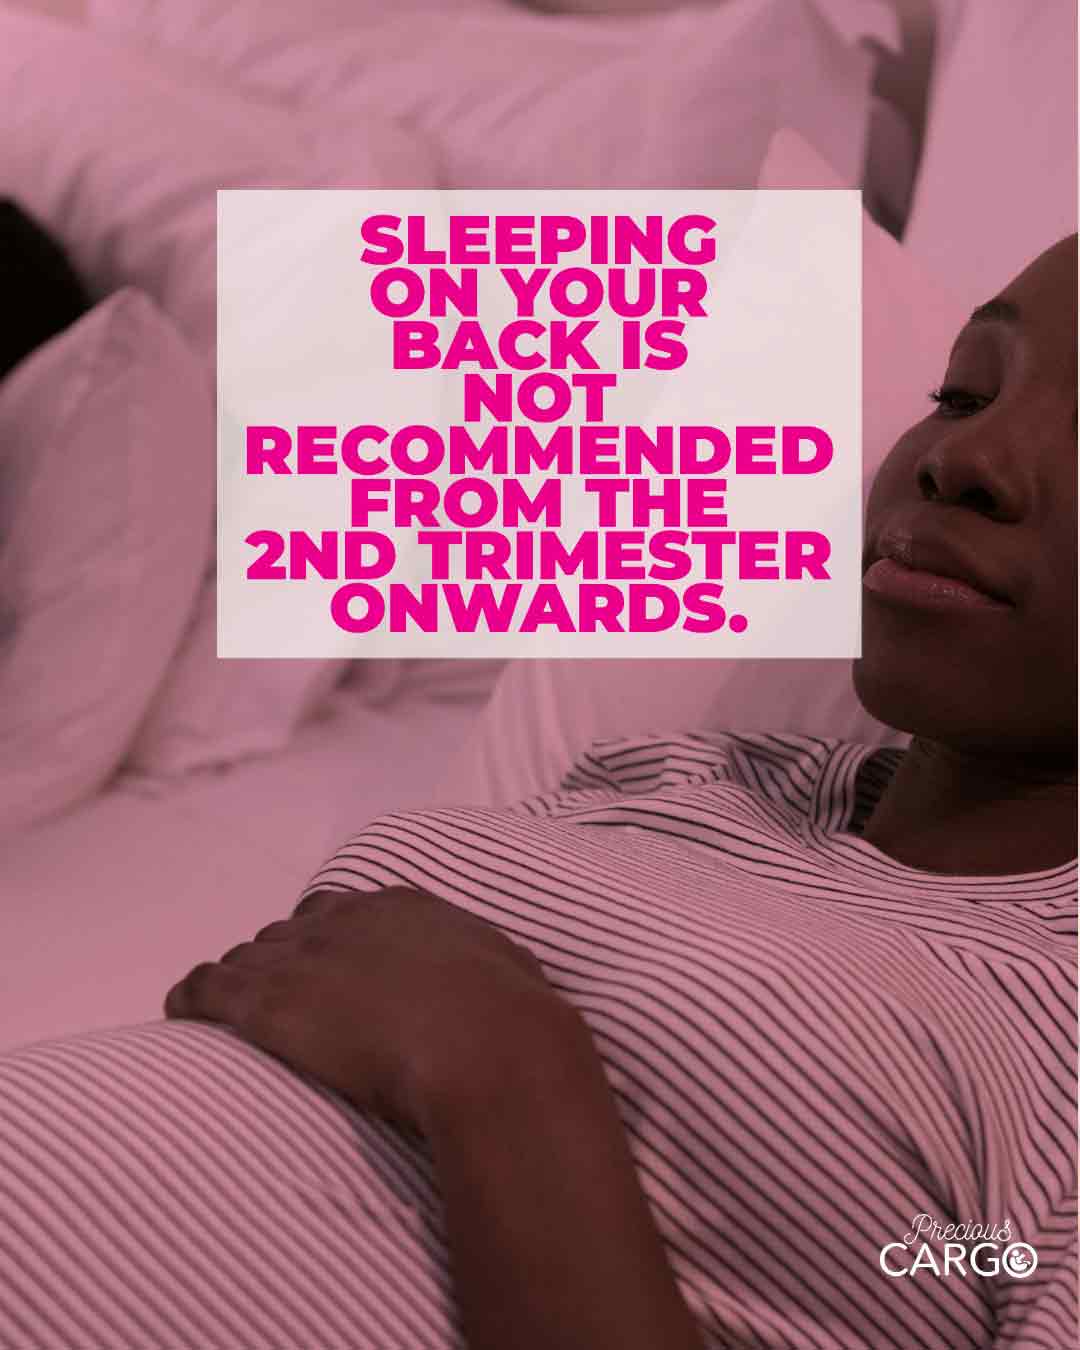 Sleeping on your back during pregnancy